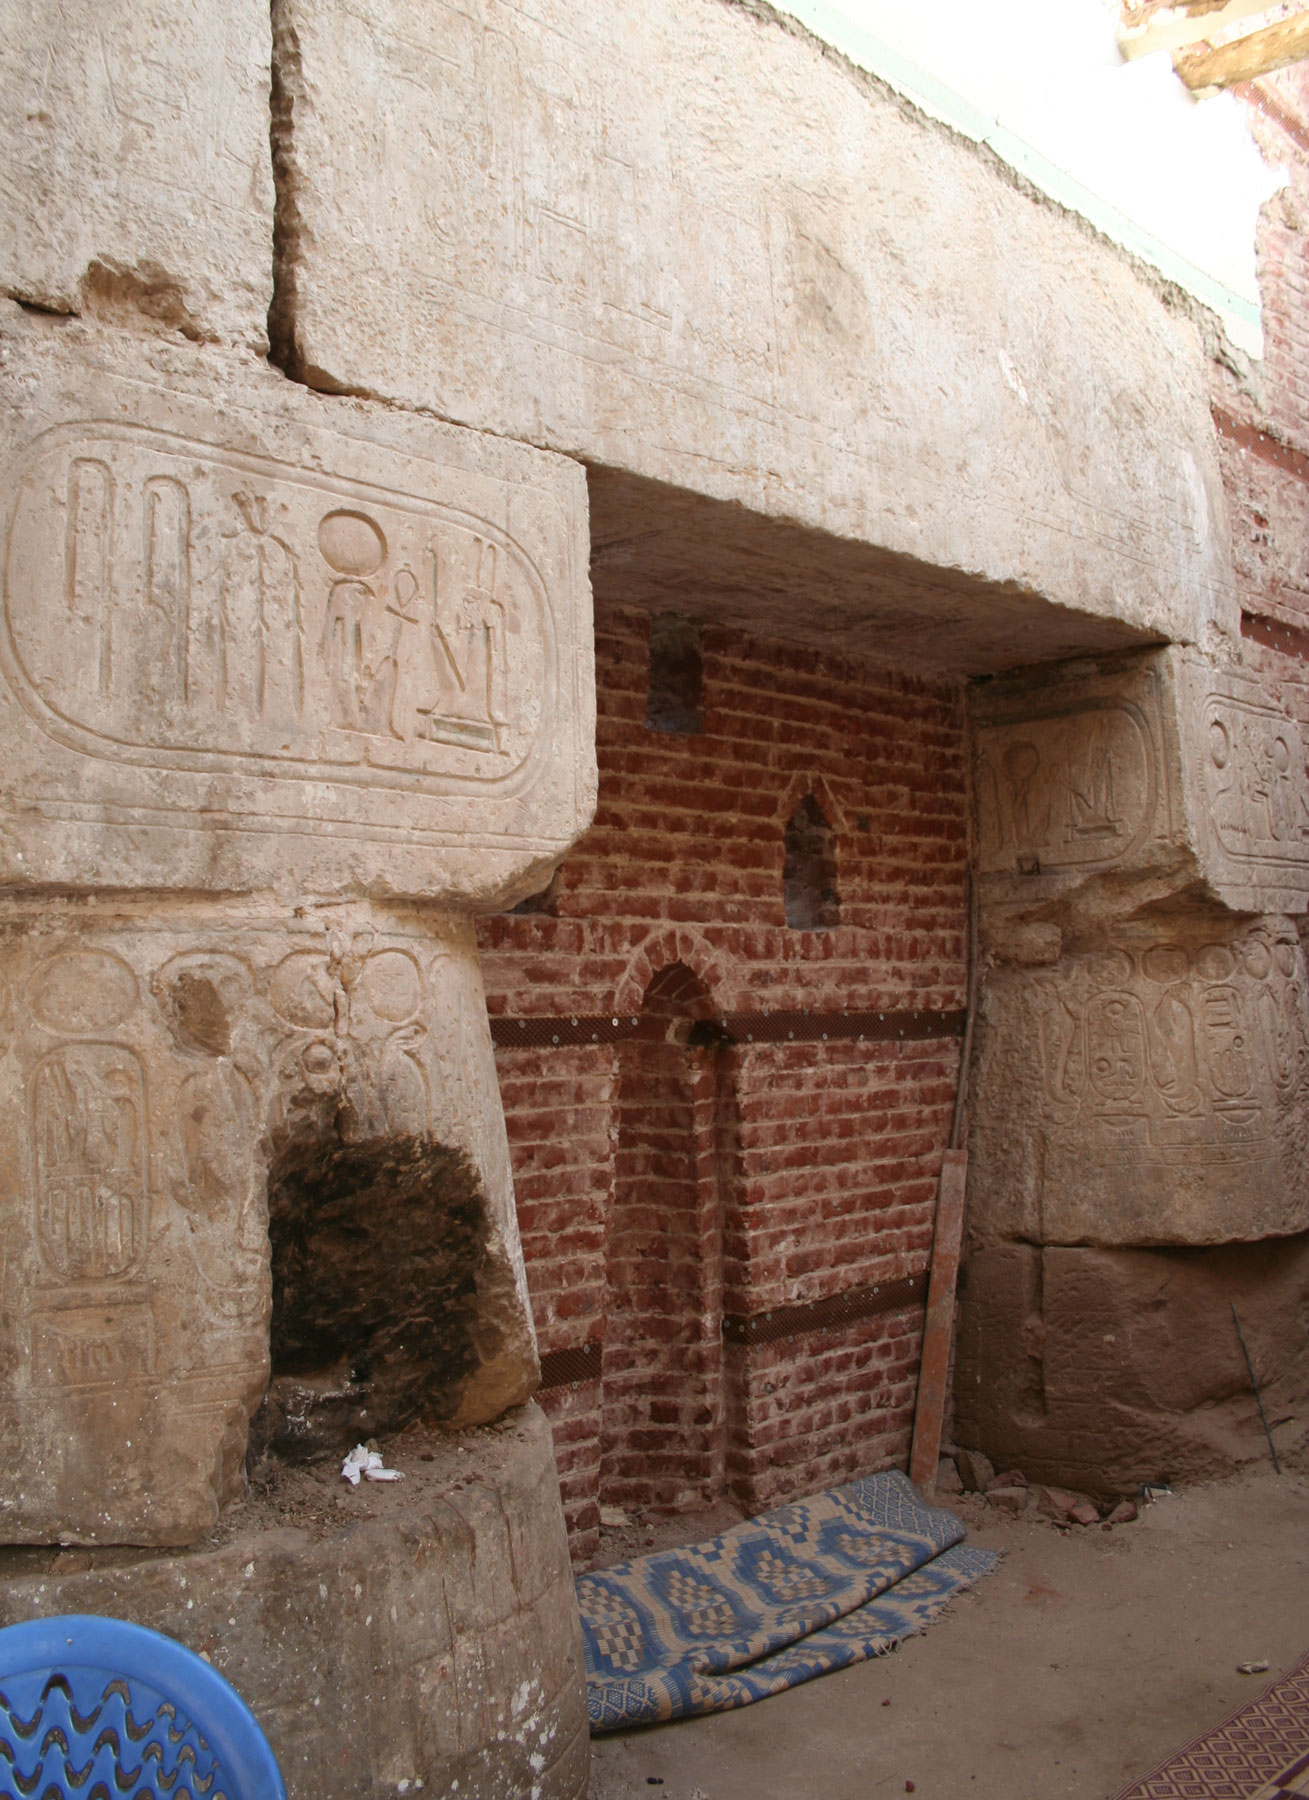 Mosque interior, focus on a brick feature wall with a niche. Around it are large sandstone blocks engraved with hieroglyphs.